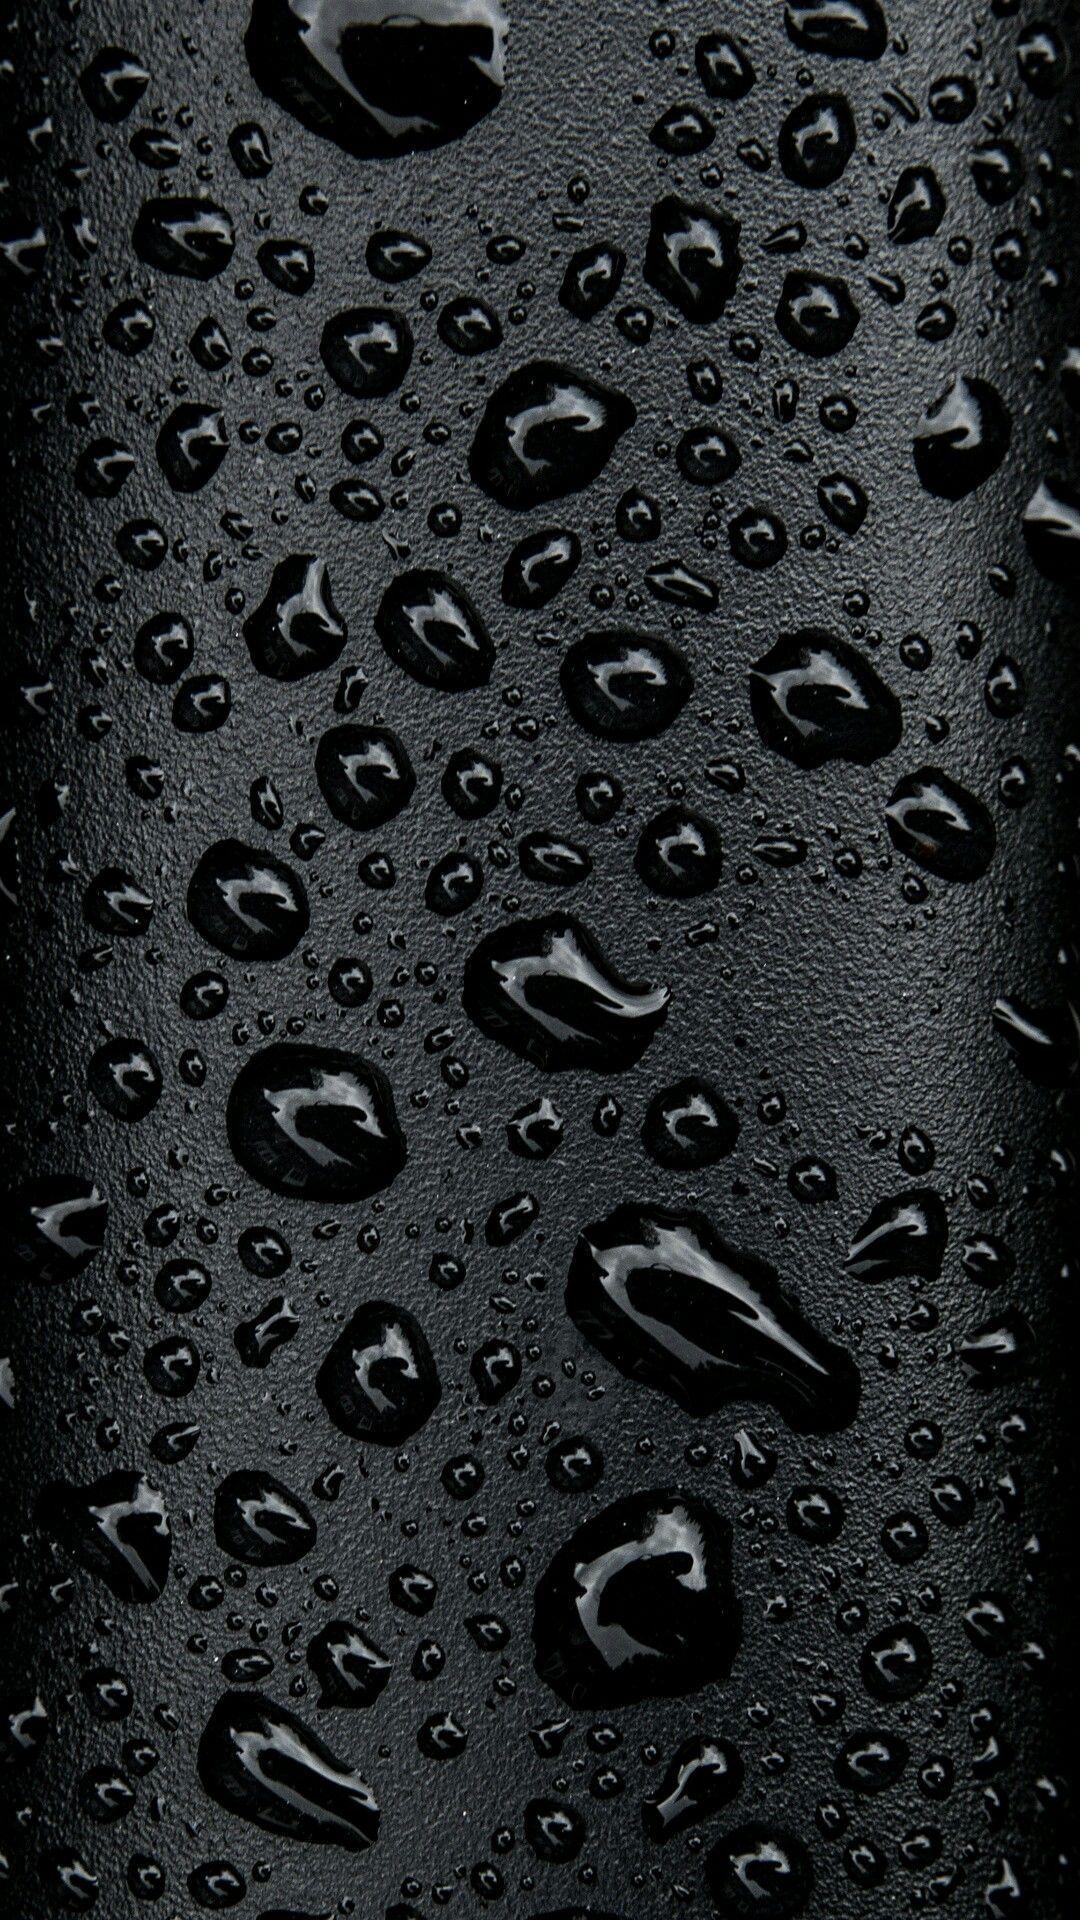 Black Water Droplets. Wallpaper (for phones) ㊗ in 2018